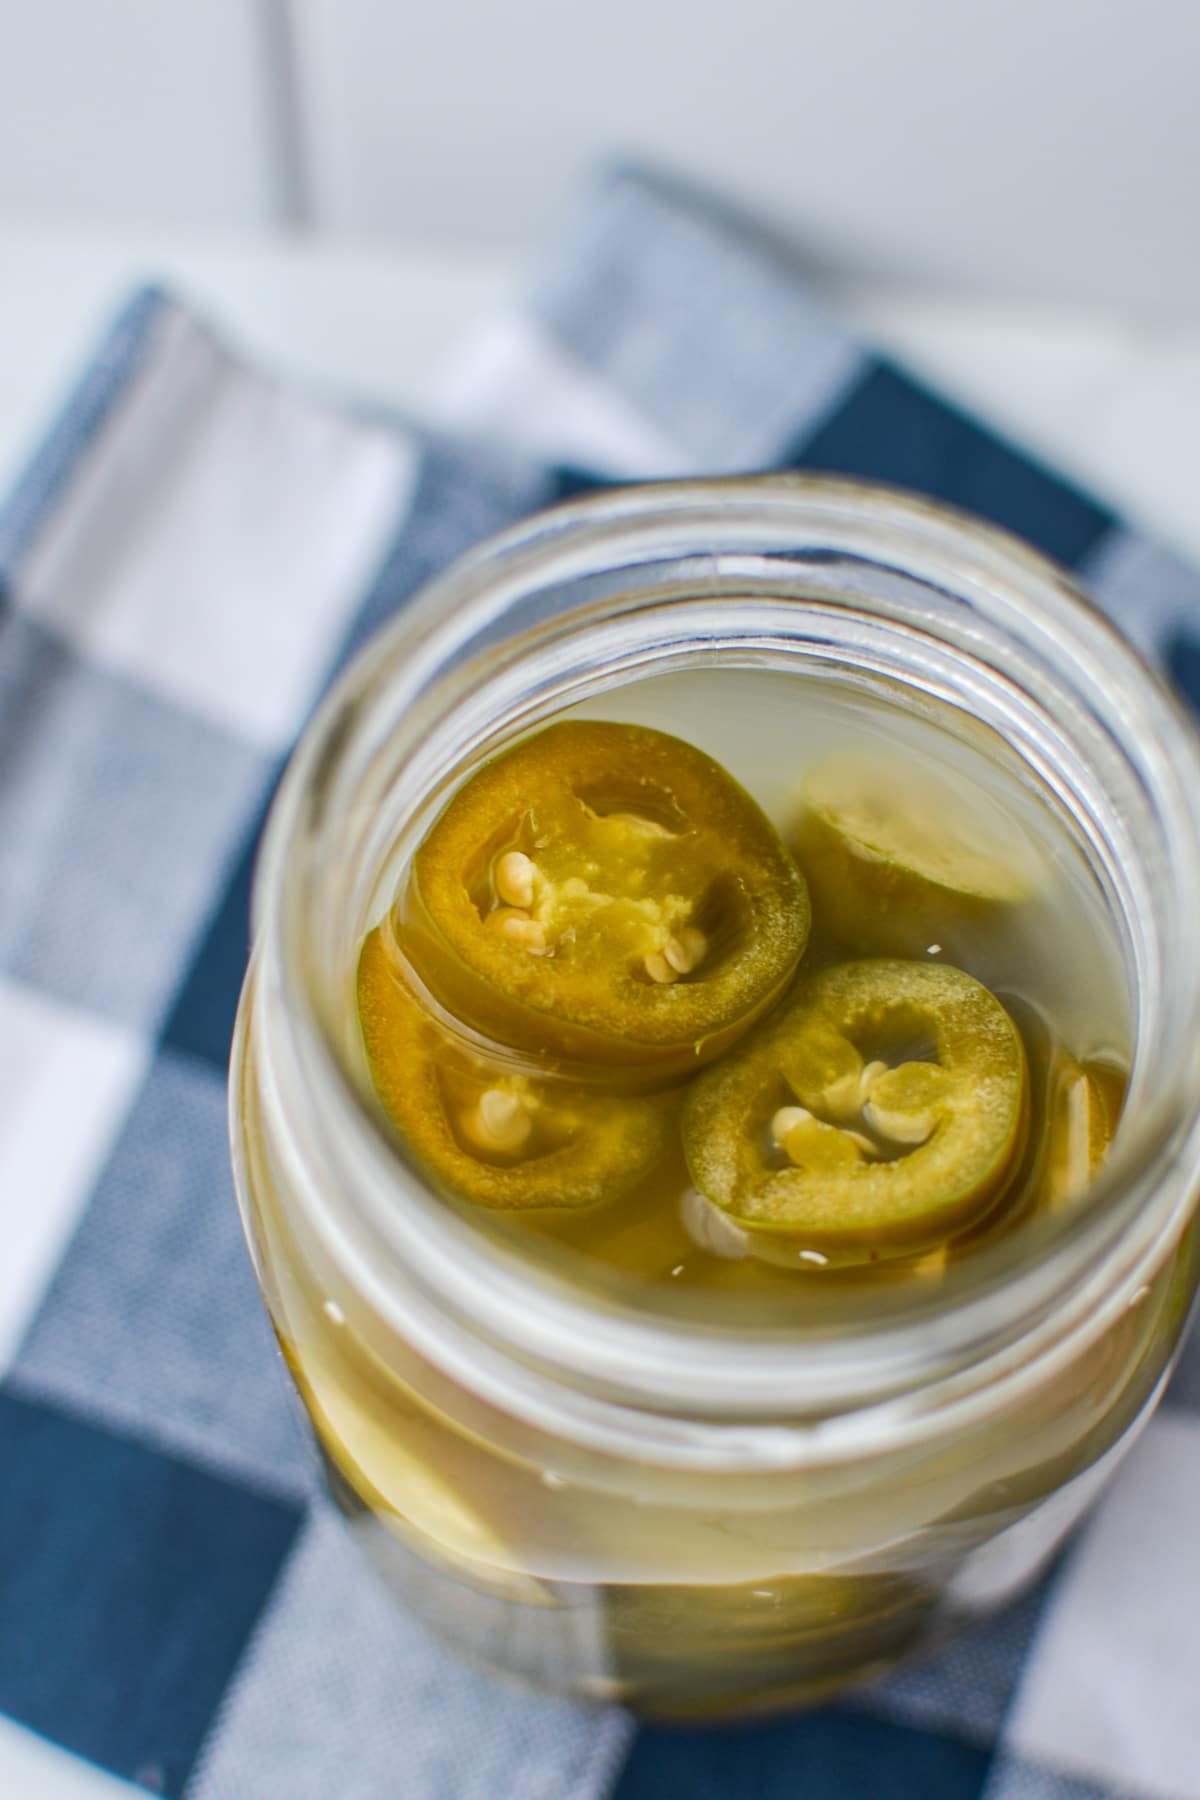 A jar of fermented jalapeno slices, on a blue check napkin.